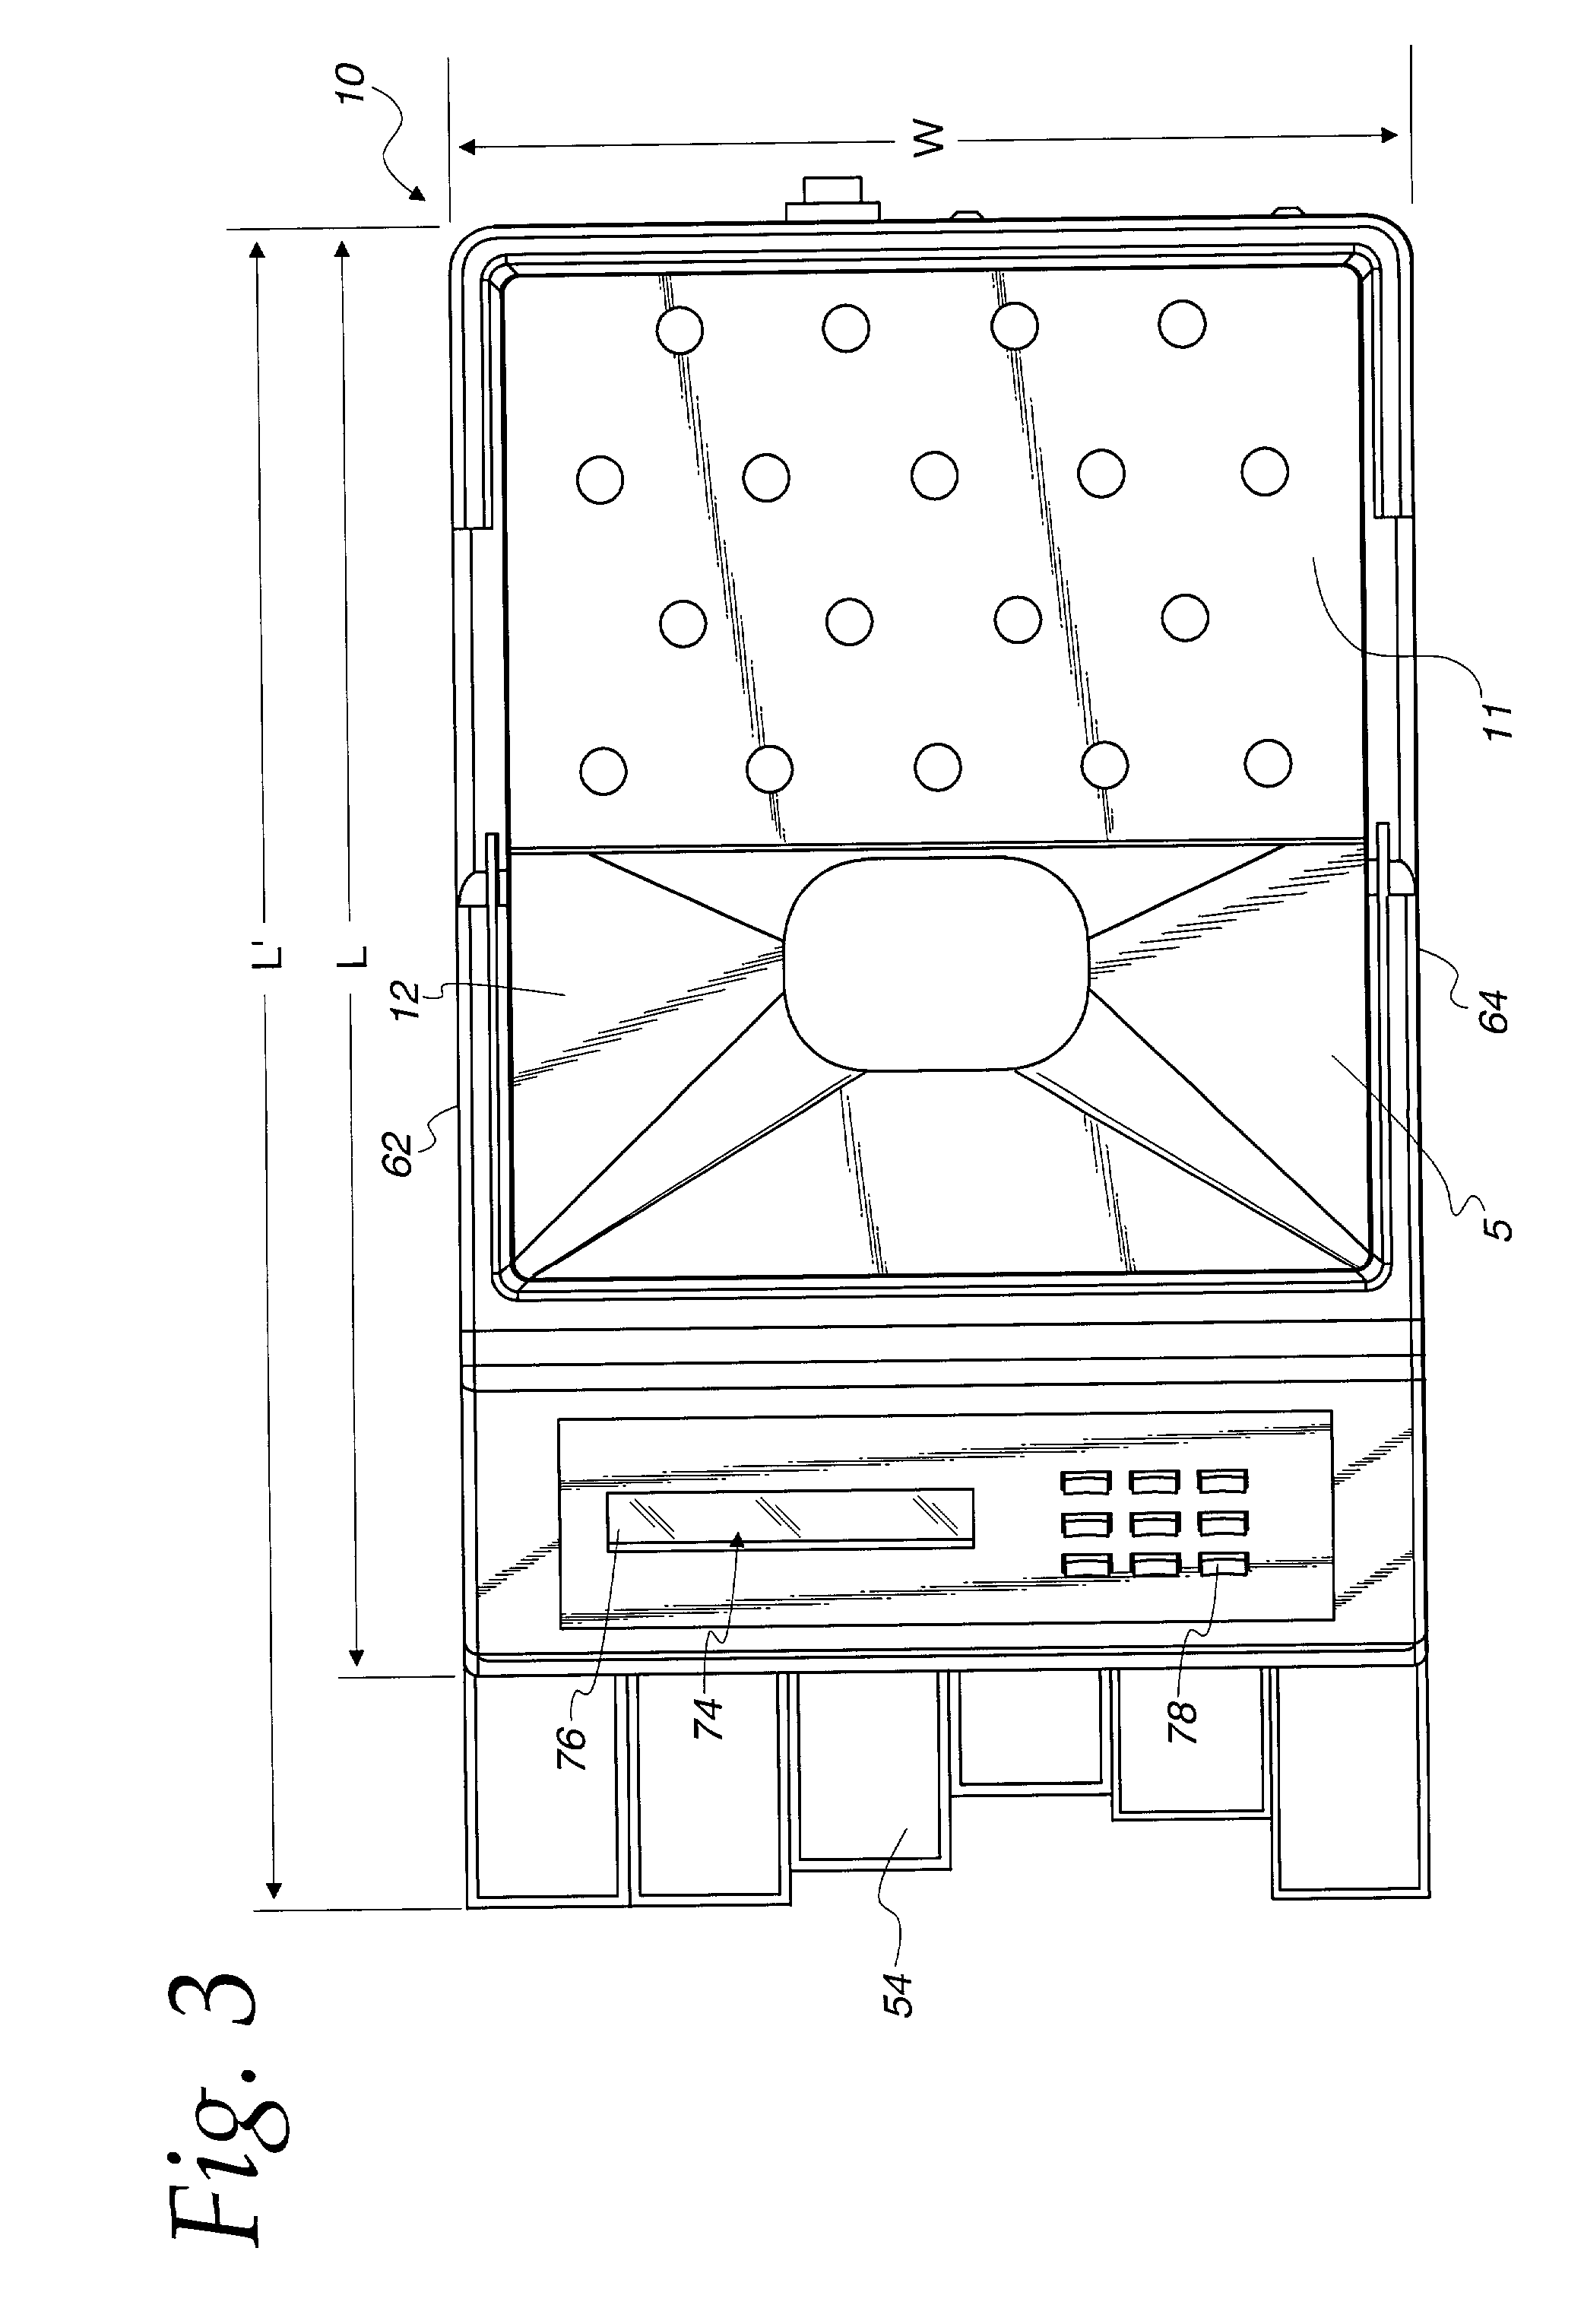 Coin processing machine having coin-impact surfaces made from laminated metal